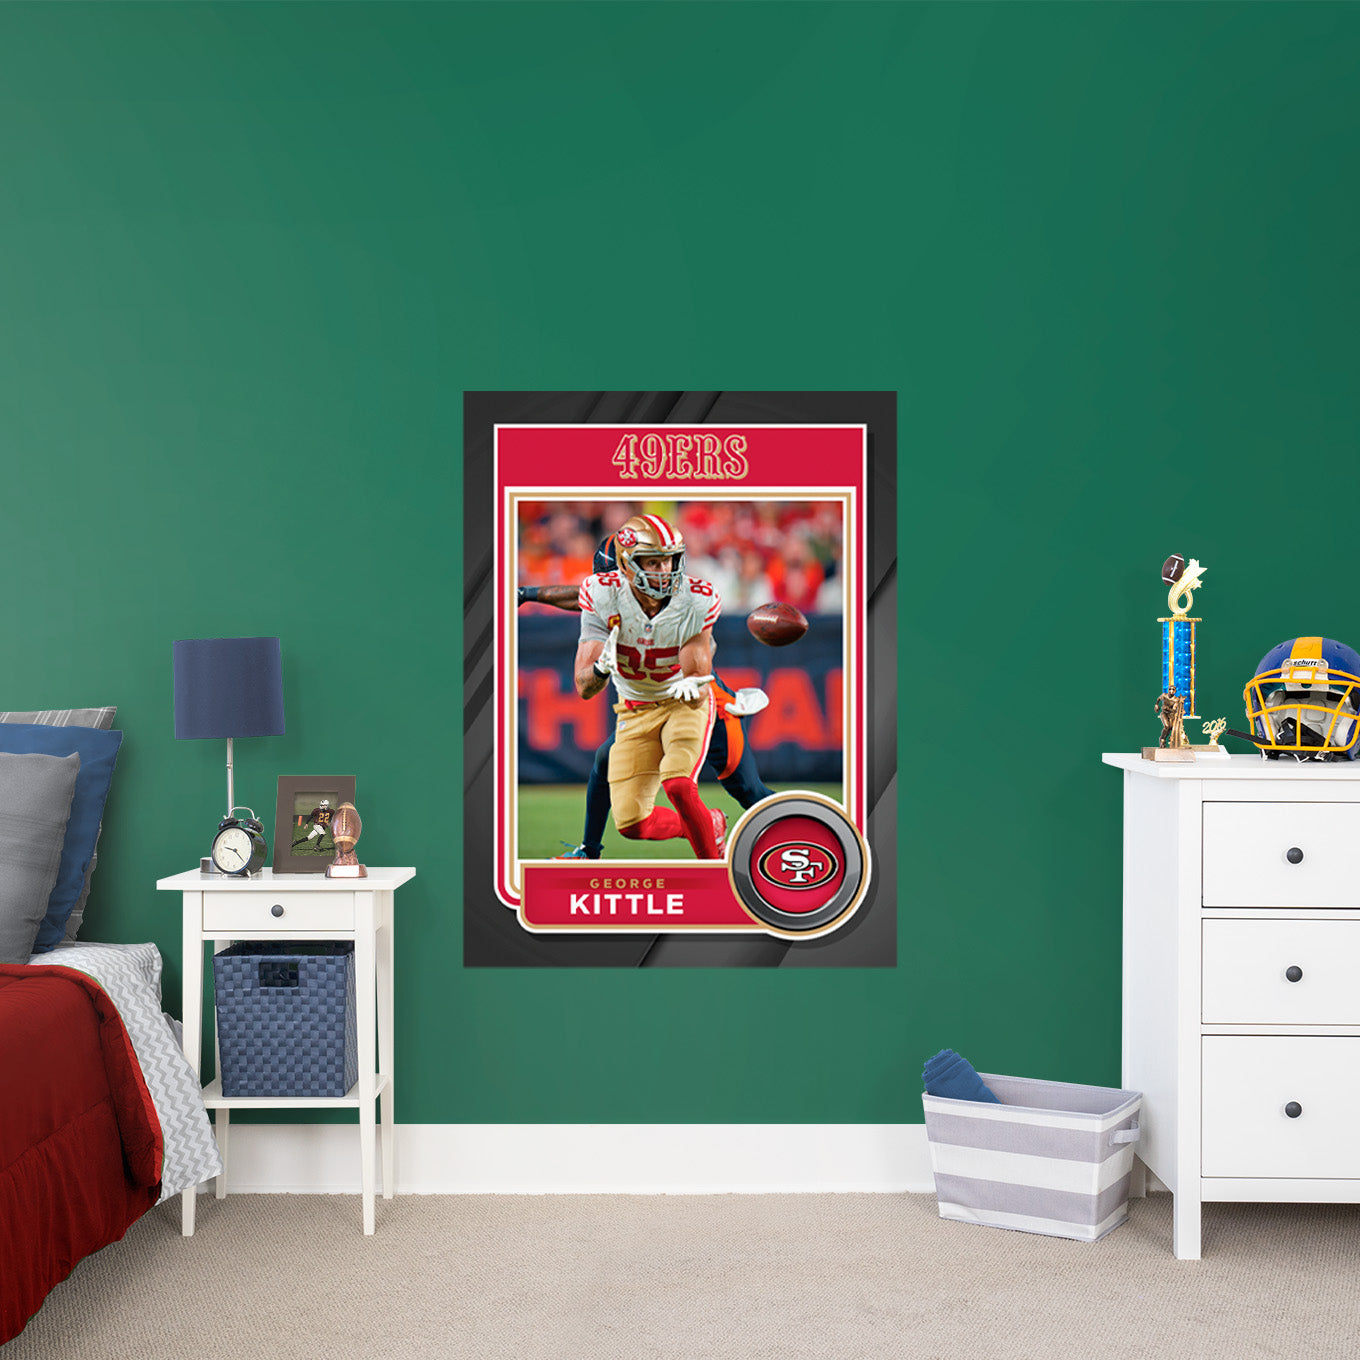 San Francisco 49ers: George Kittle Poster - Officially Licensed NFL Removable Adhesive Decal